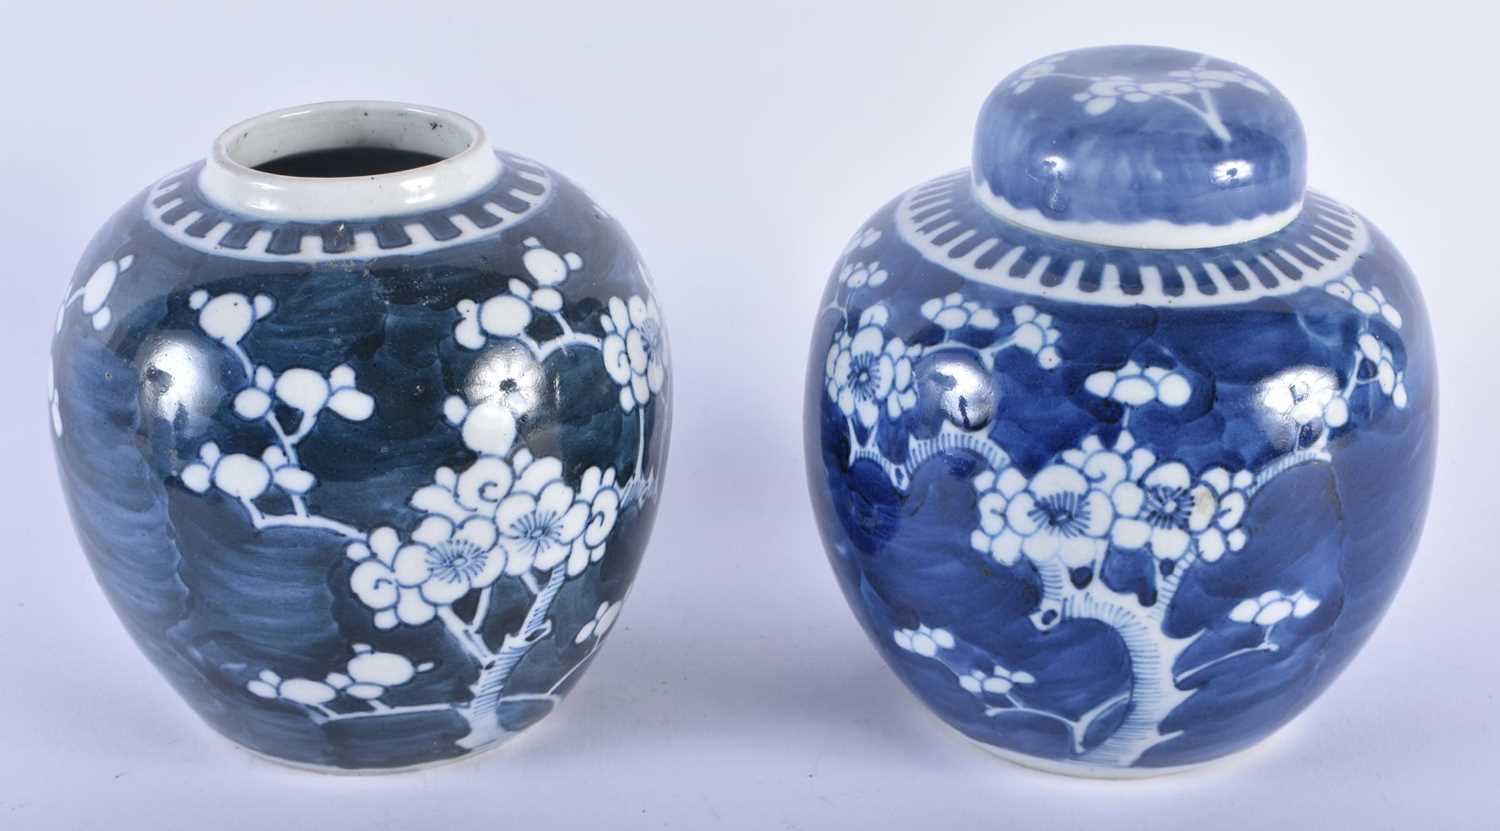 TWO 19TH CENTURY CHINESE BLUE AND WHITE PORCELAIN GINGER JARS Kangxi style. Largest 15 cm x 12 - Image 2 of 4